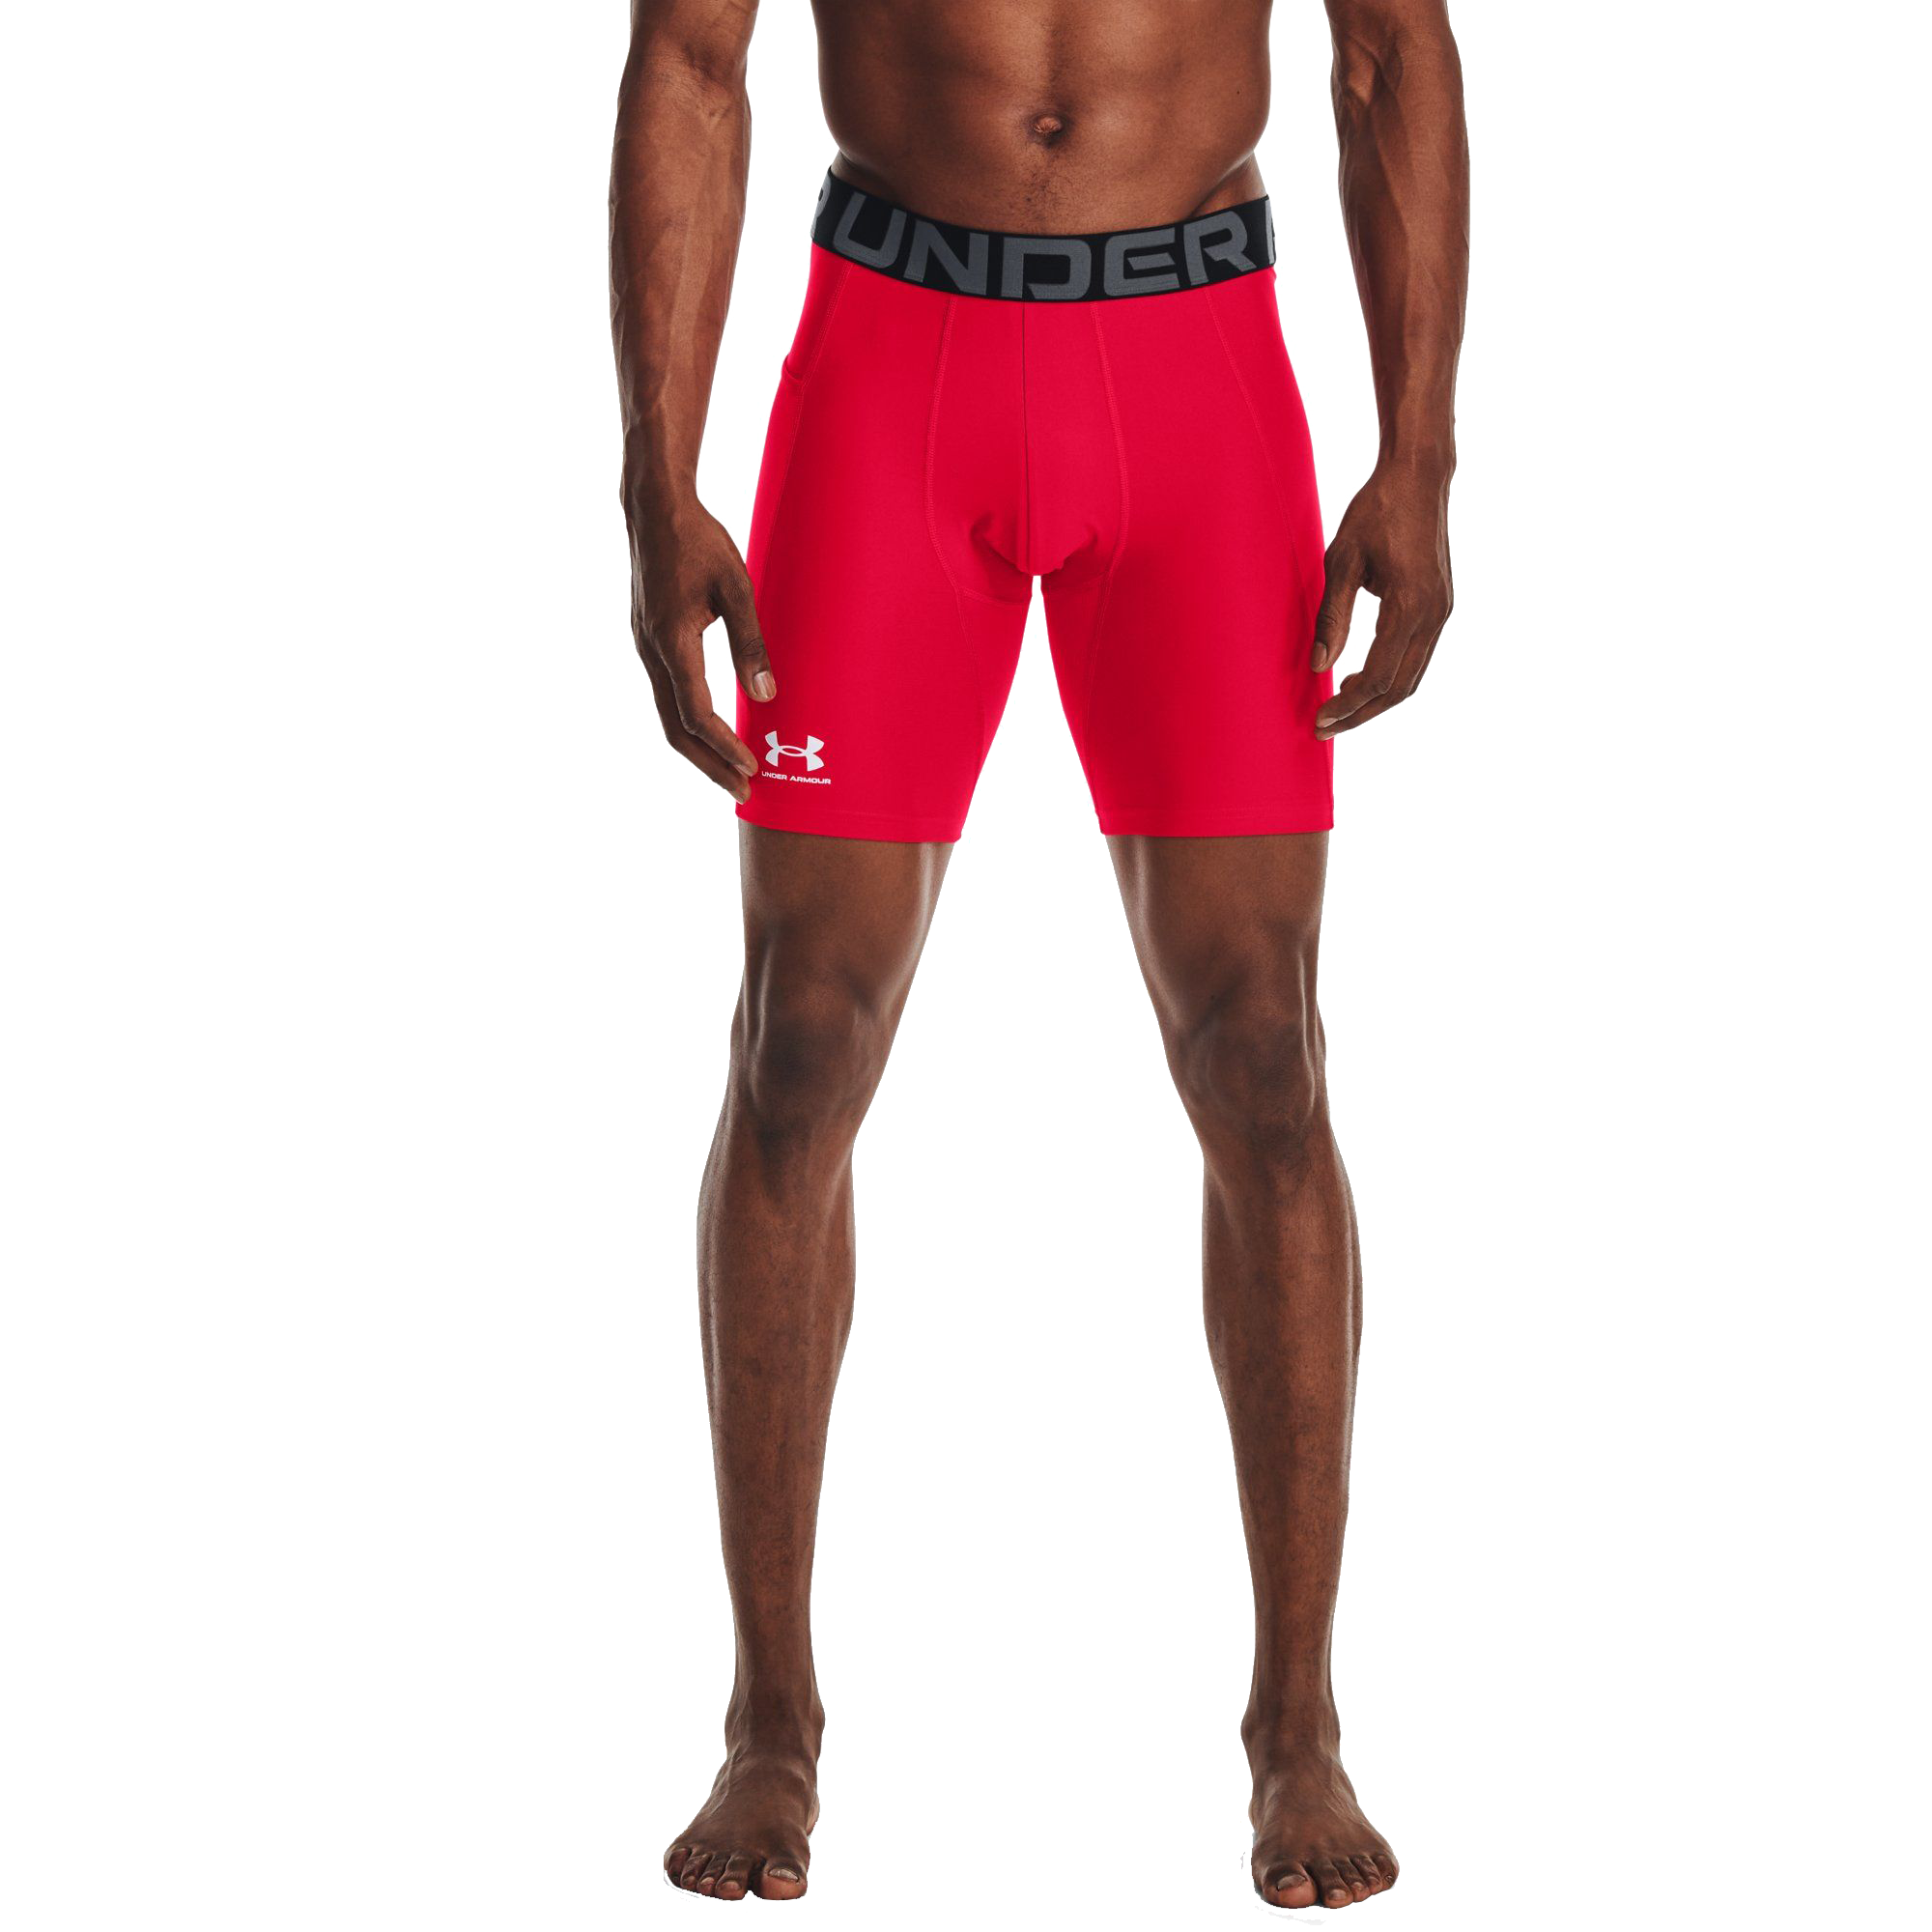 Under Armour HeatGear Armour Compression Shorts for Men - Red/White - LT